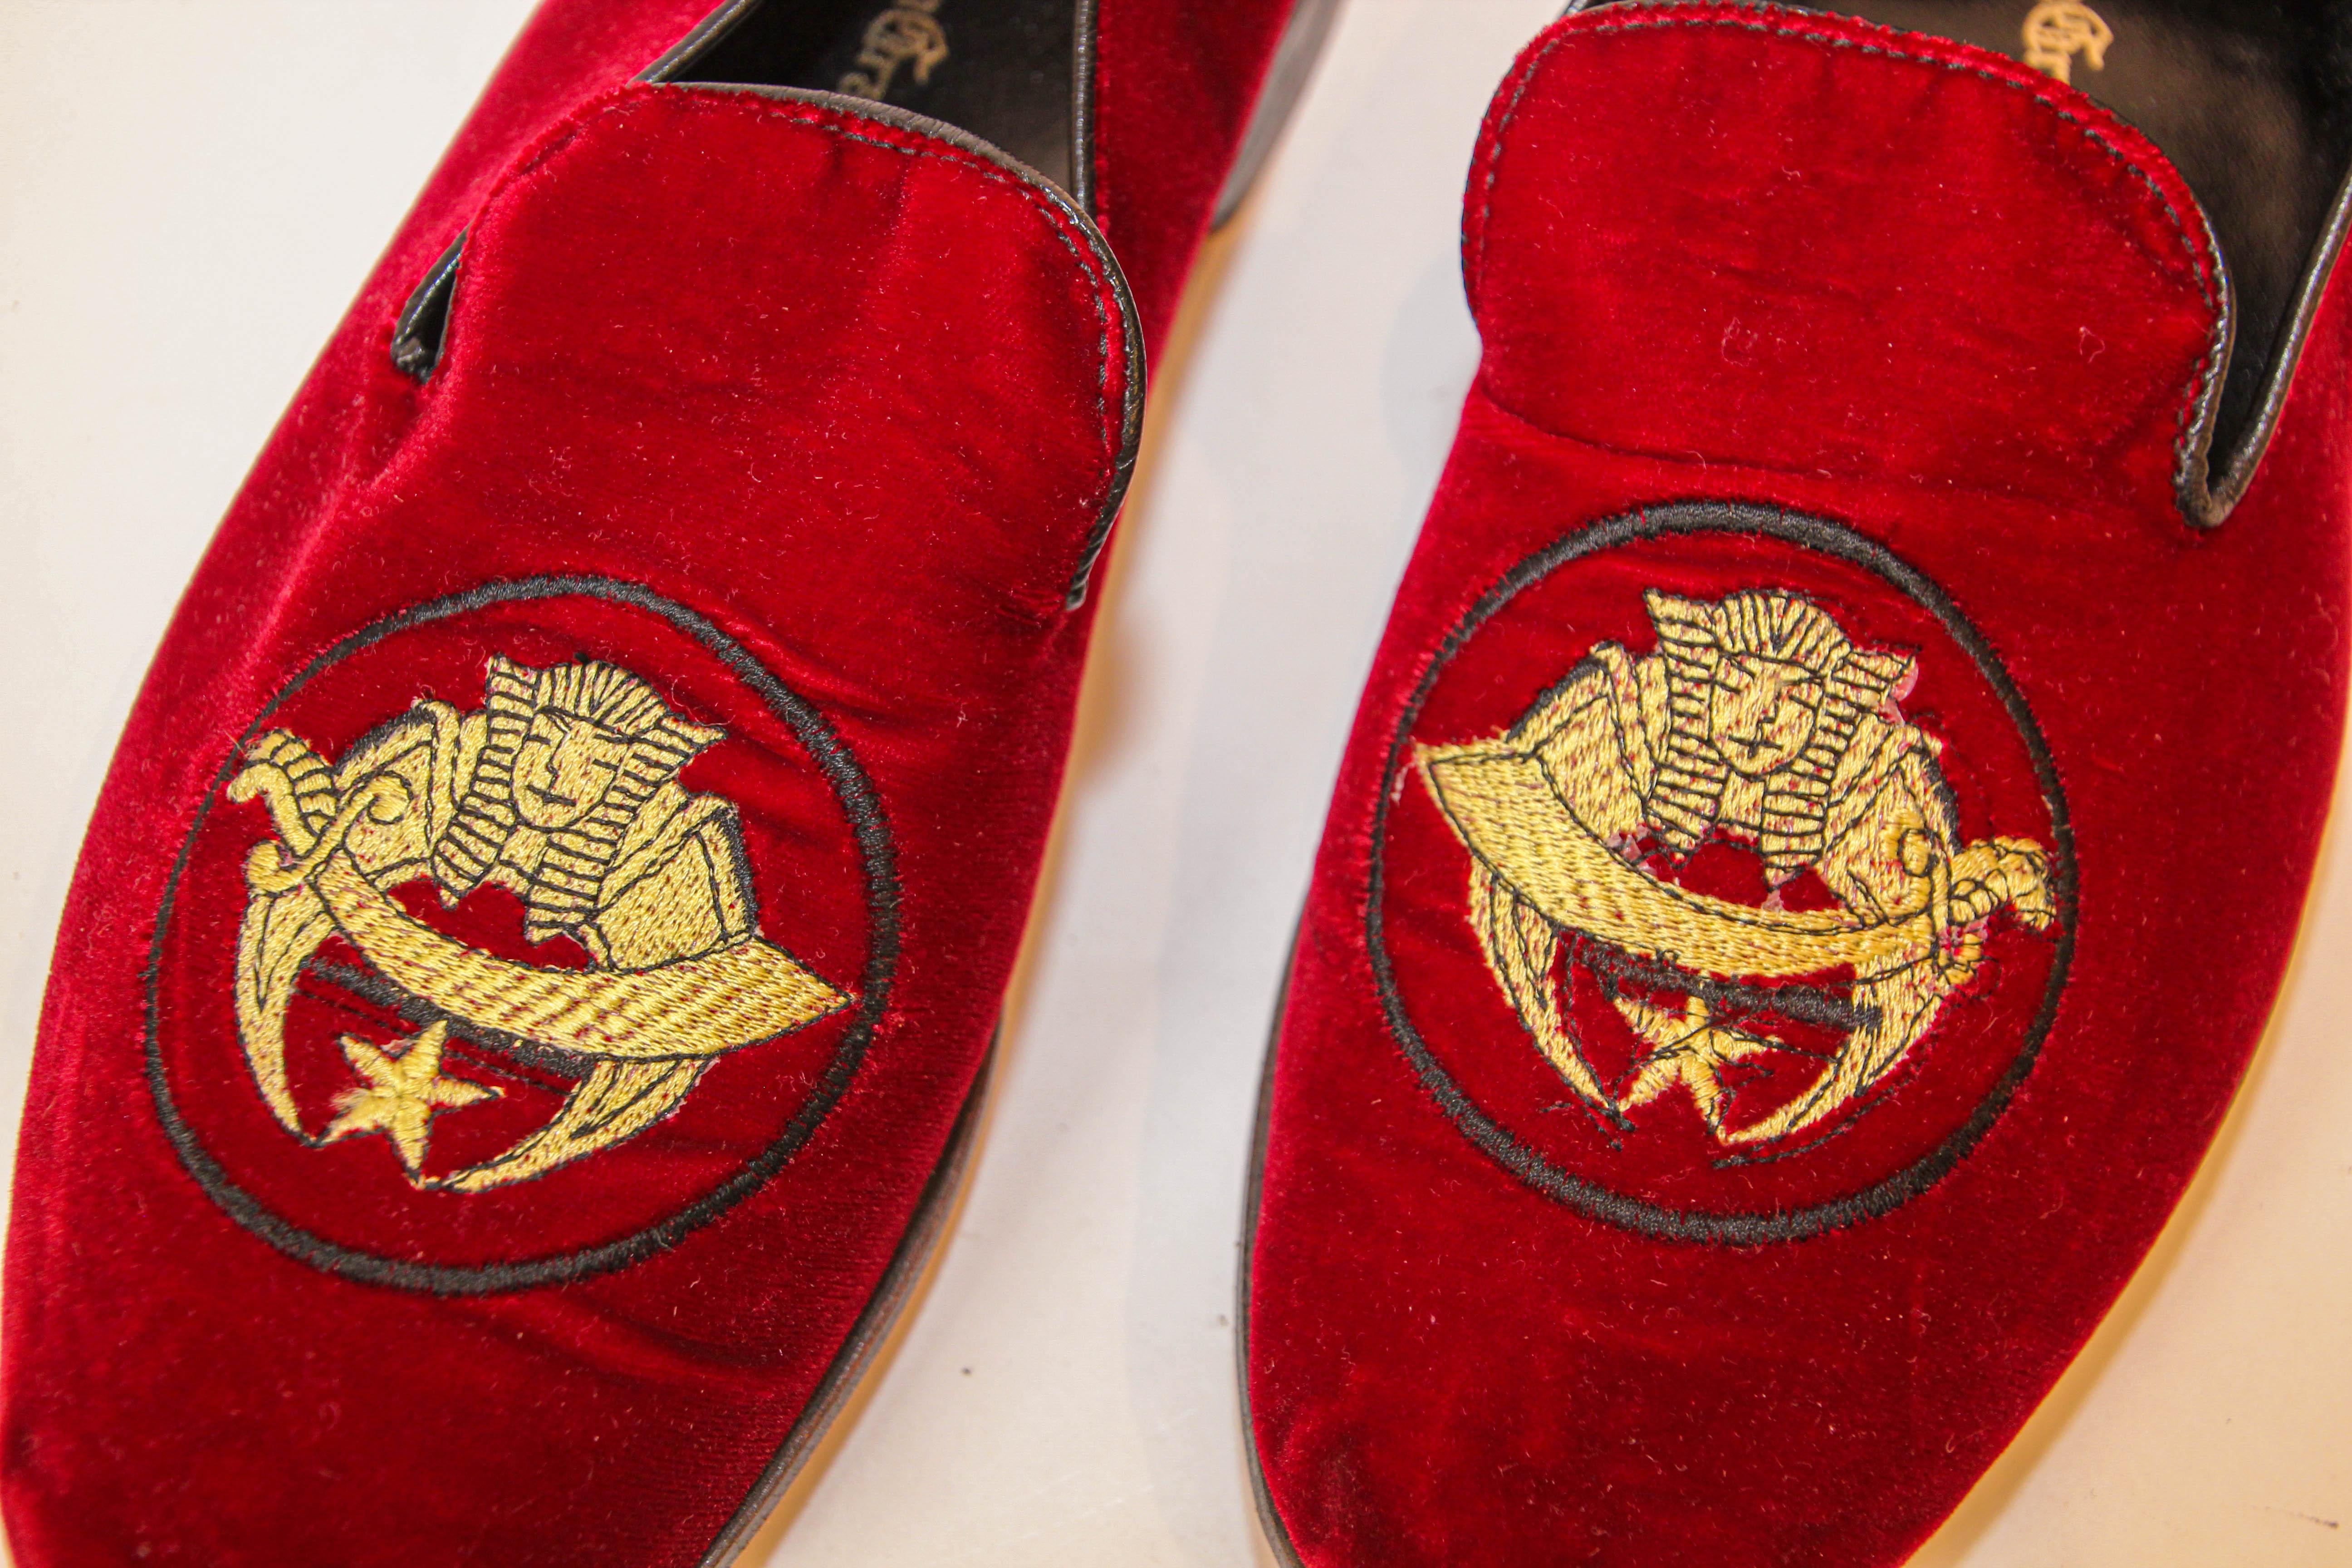 Shriner Red Velvet Shoes Embroidery Loafers Slip On Size 8.5 In Good Condition For Sale In North Hollywood, CA